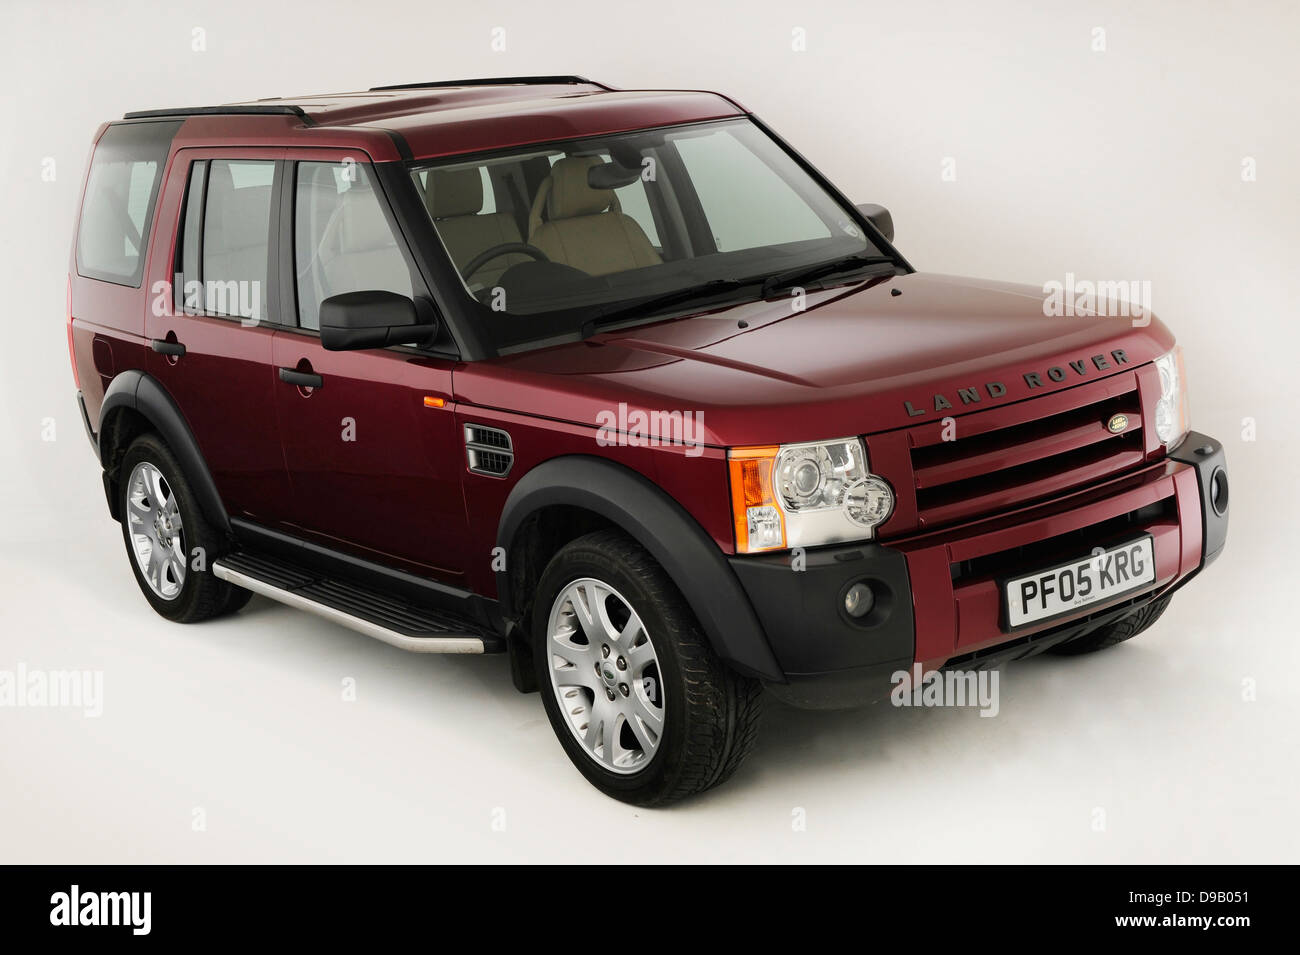 2005 Land Rover Discovery 3 Photo Stock - Alamy